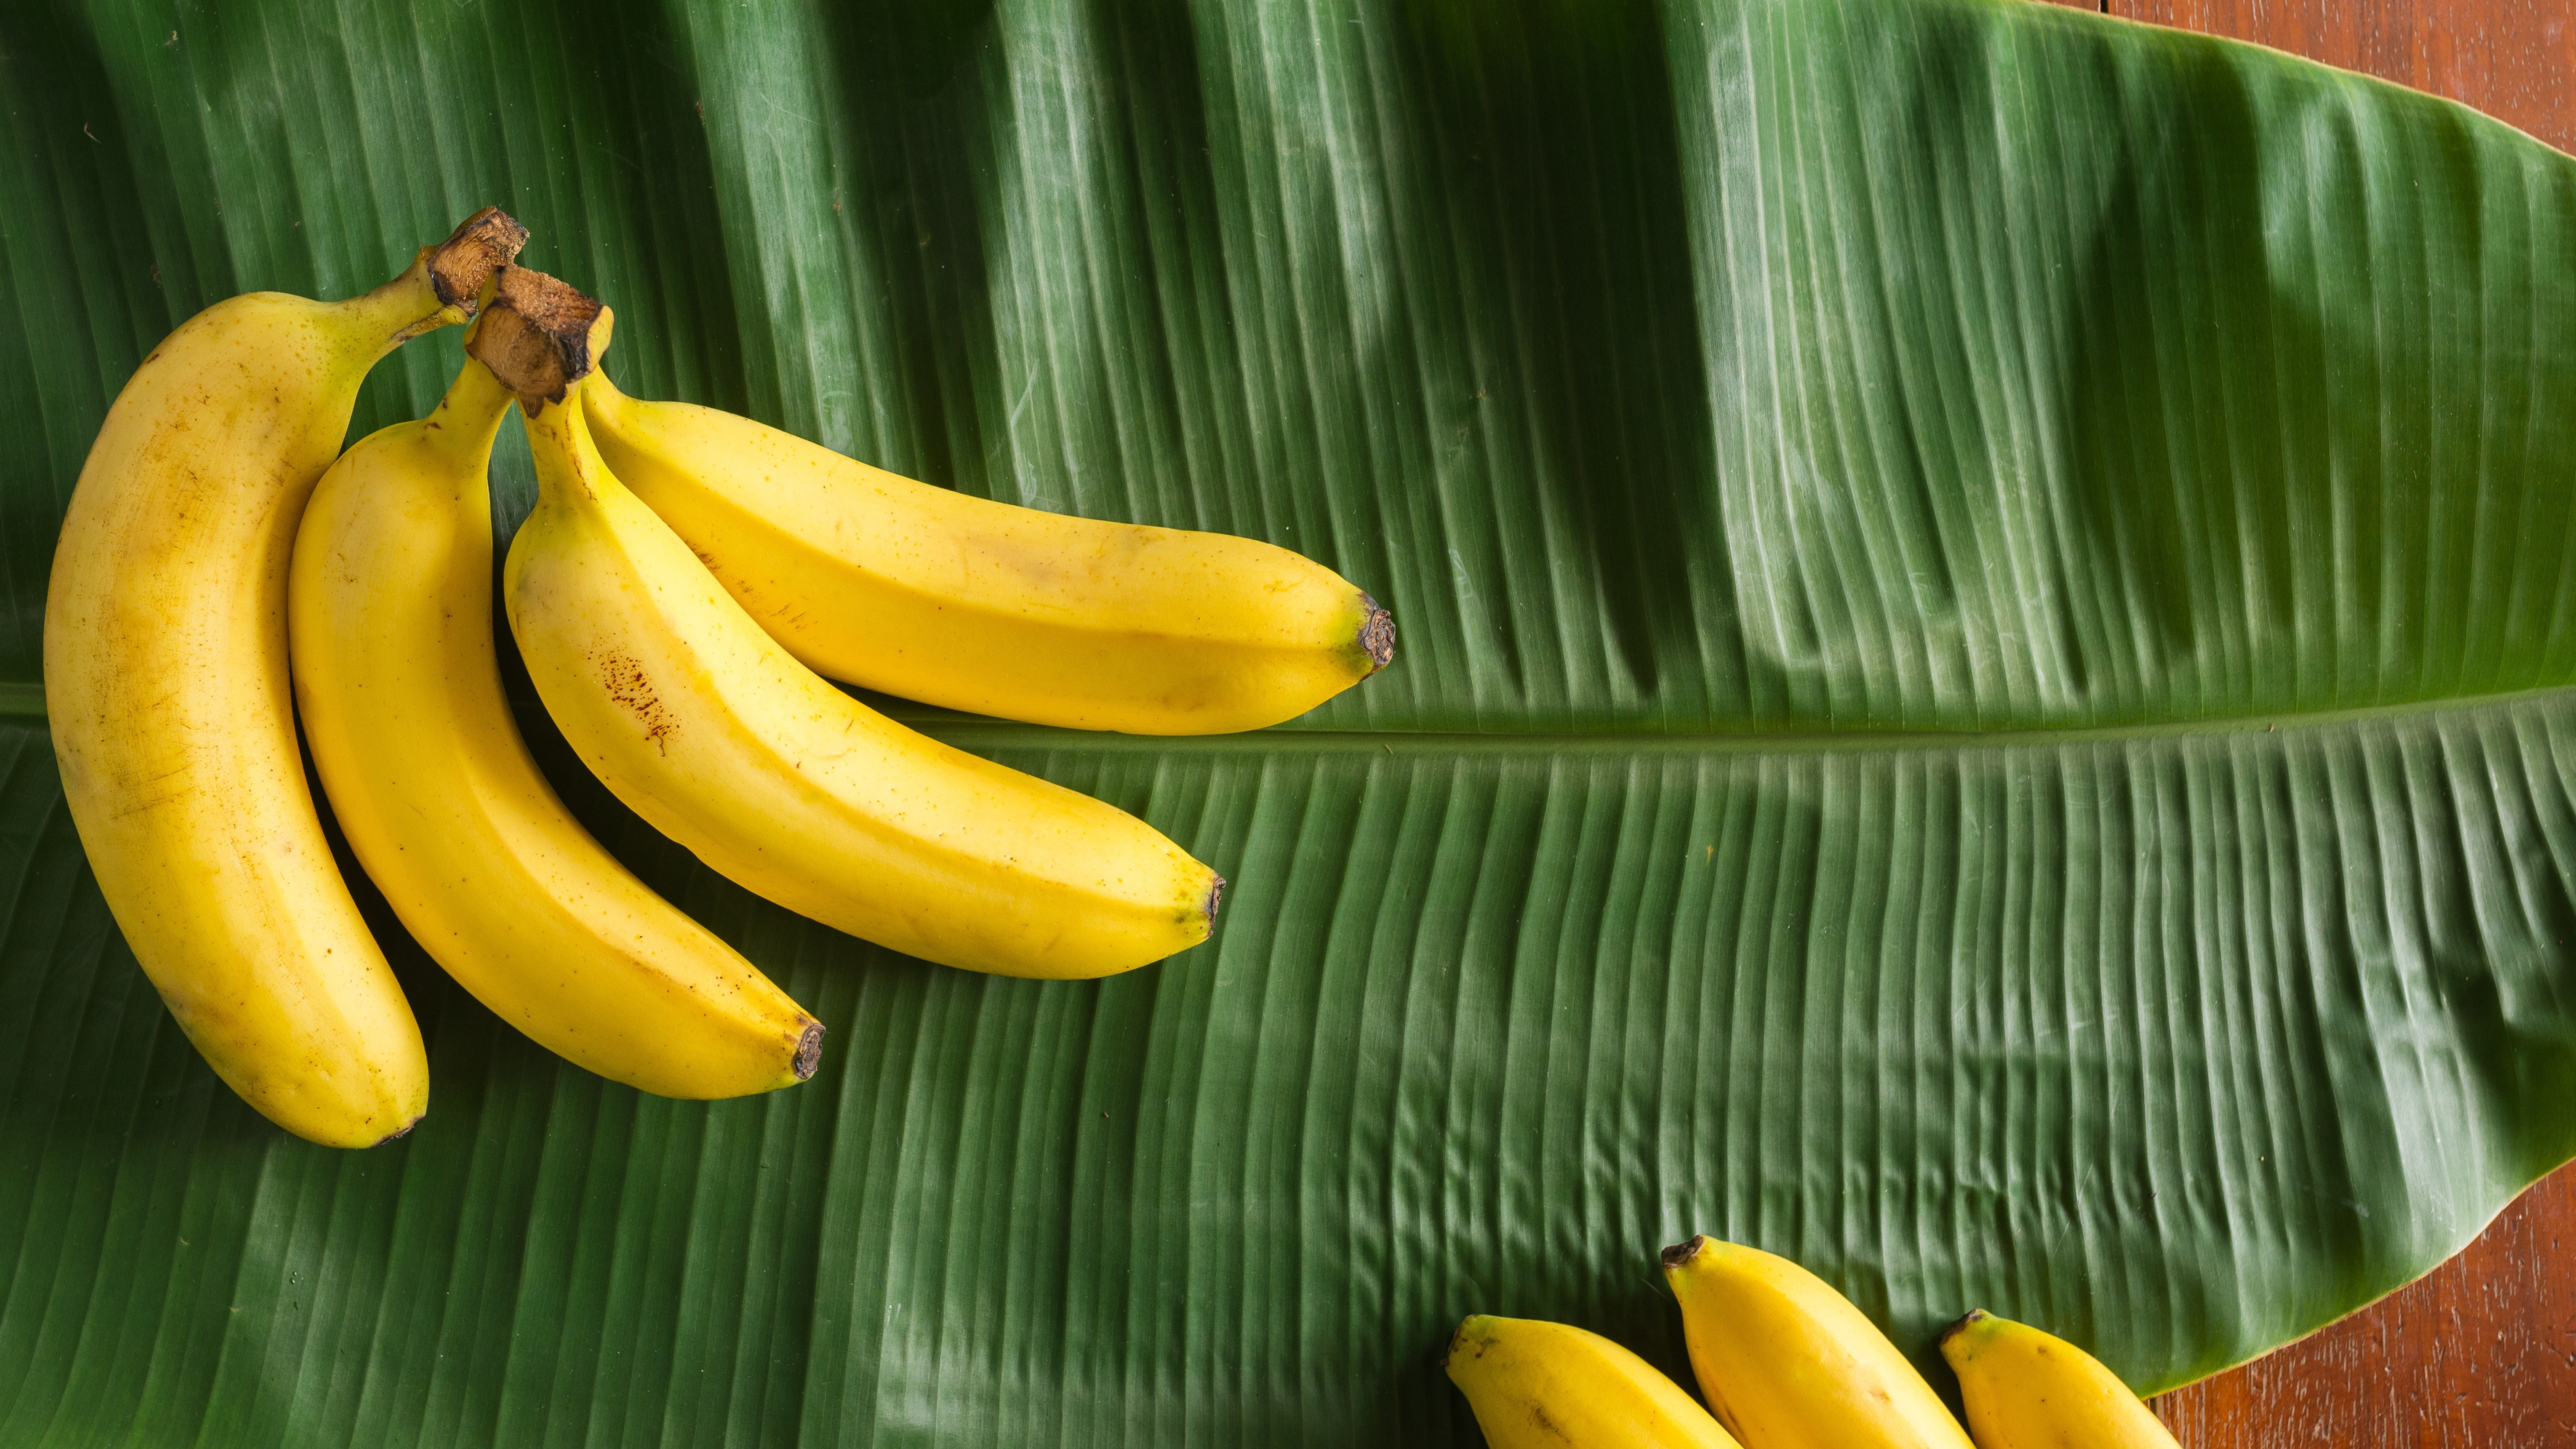 a pile of yellow bananas lay on top of the green fresh banana leaf